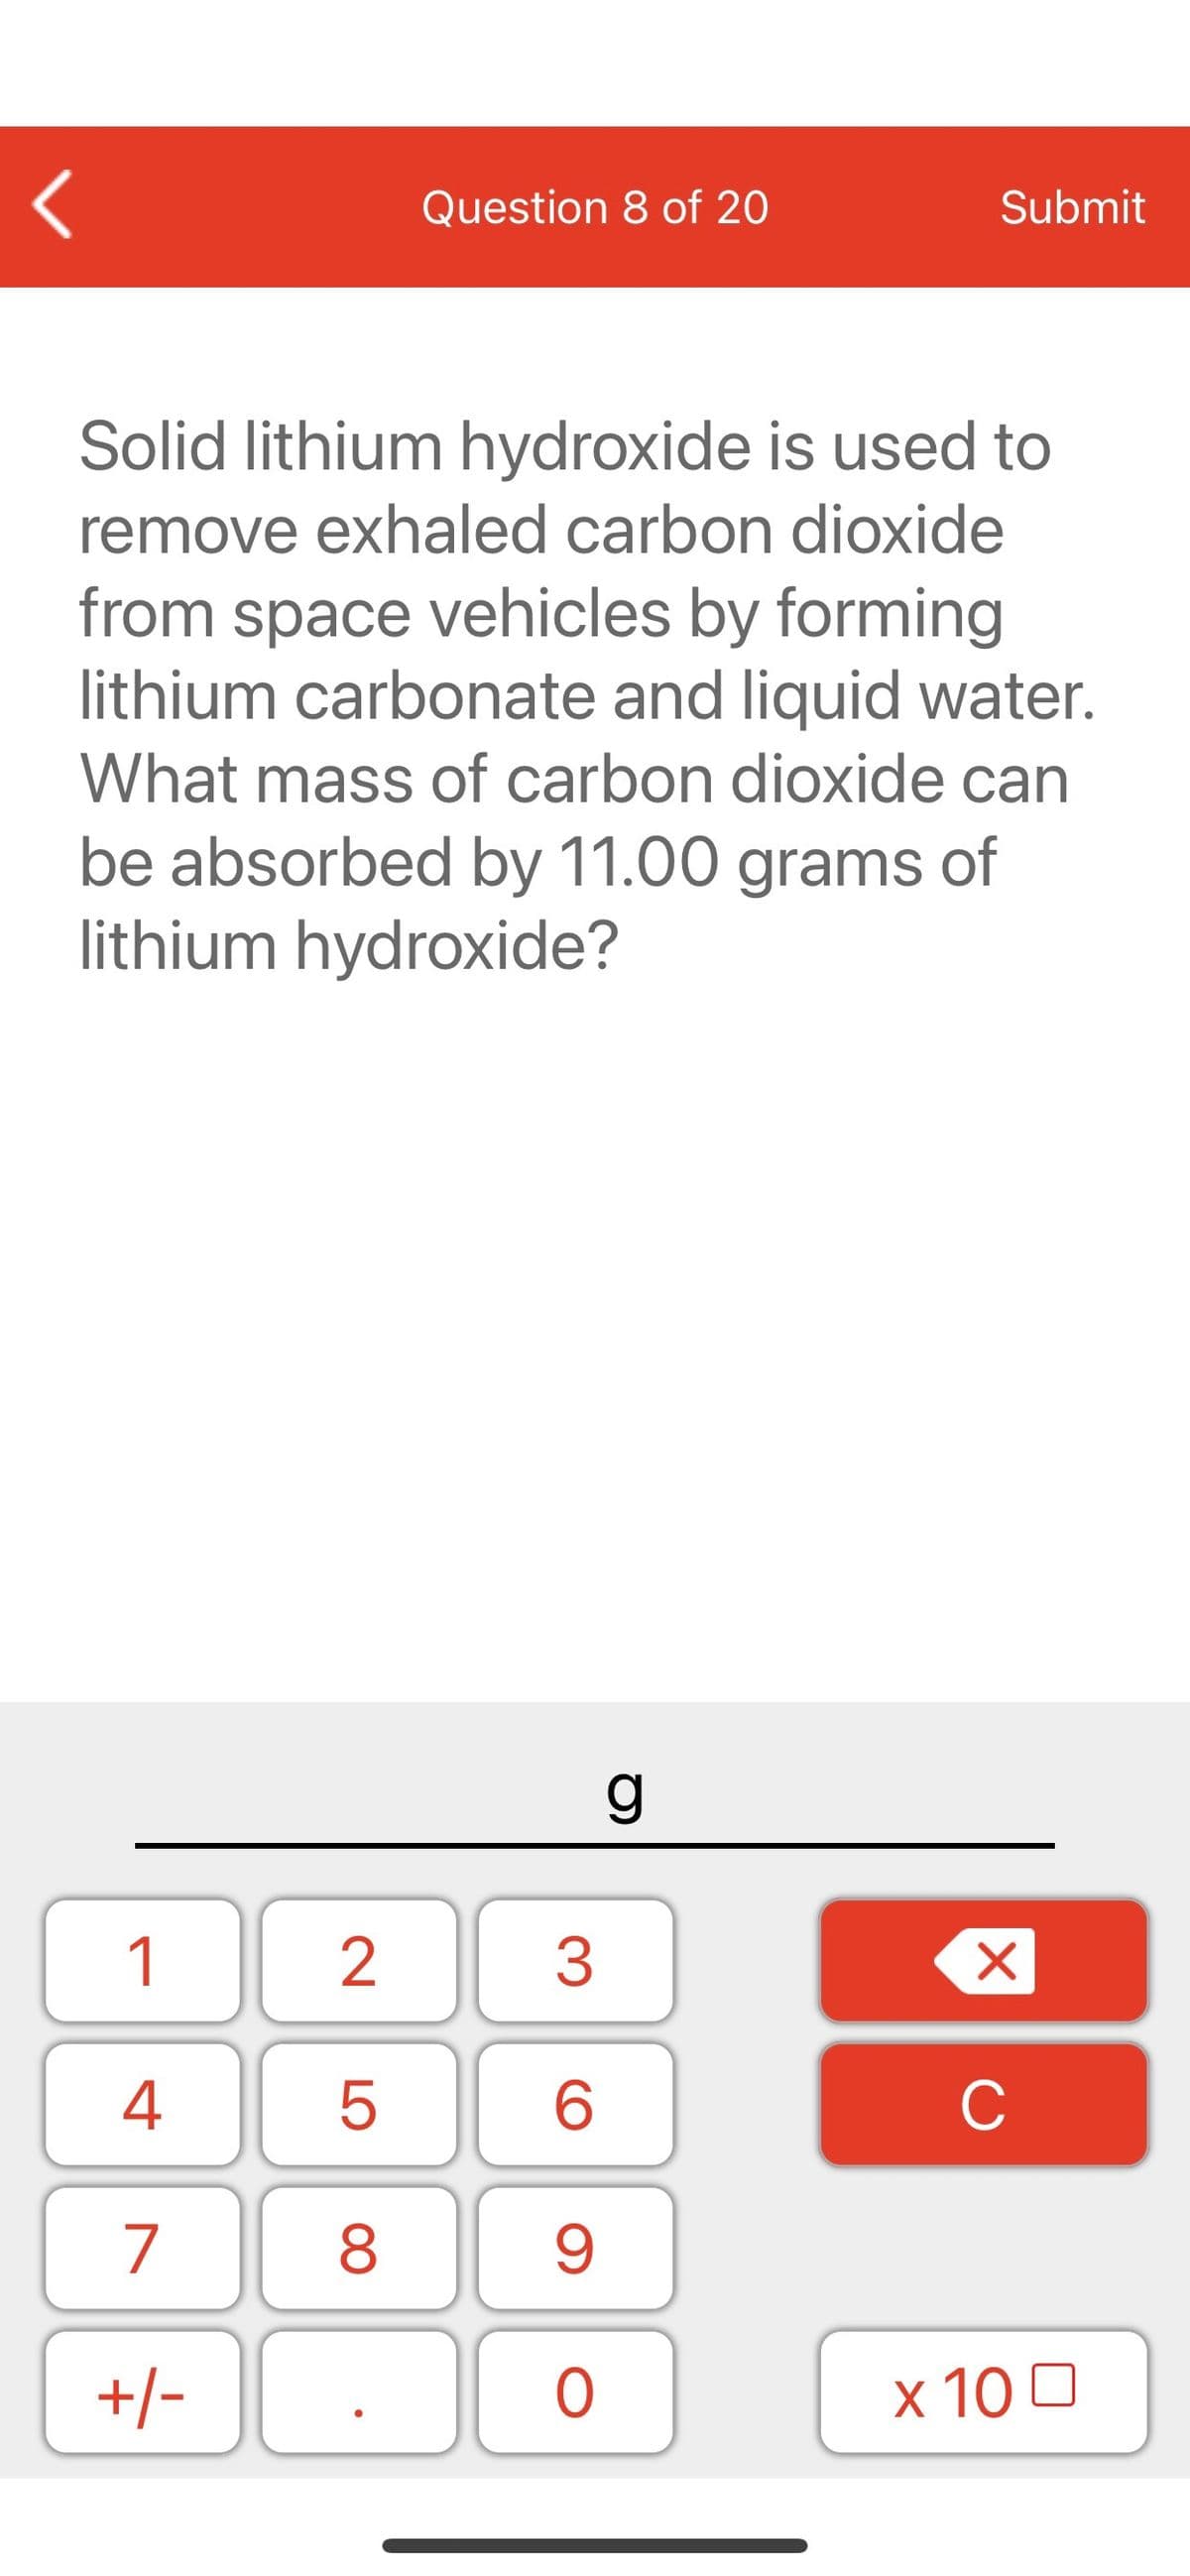 Question 8 of 20
Submit
Solid lithium hydroxide is used to
remove exhaled carbon dioxide
from space vehicles by forming
lithium carbonate and liquid water.
What mass of carbon dioxide can
be absorbed by 11.00 grams of
lithium hydroxide?
1
2
3
C
7
9.
+/-
x 10 0
LO
00
